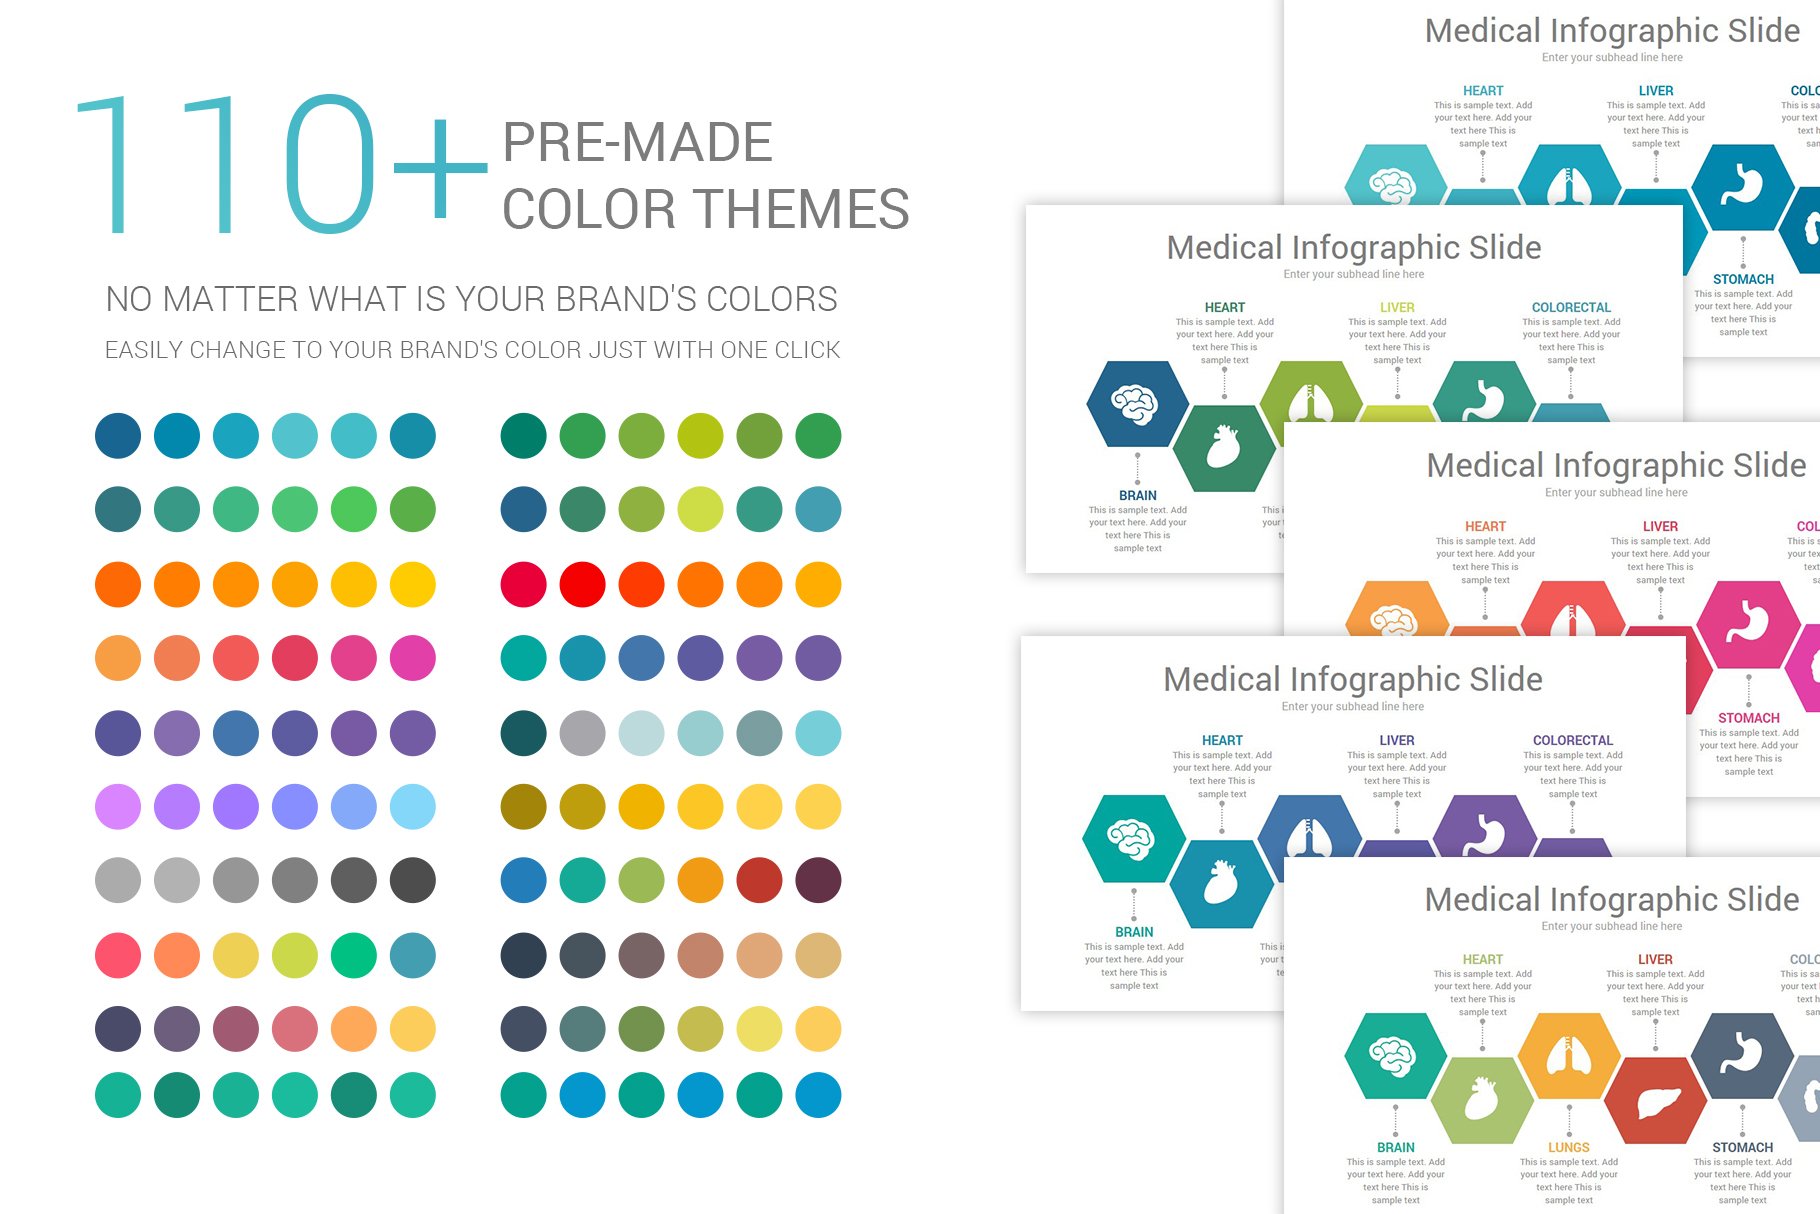 Pre-made color schemes for infographic.